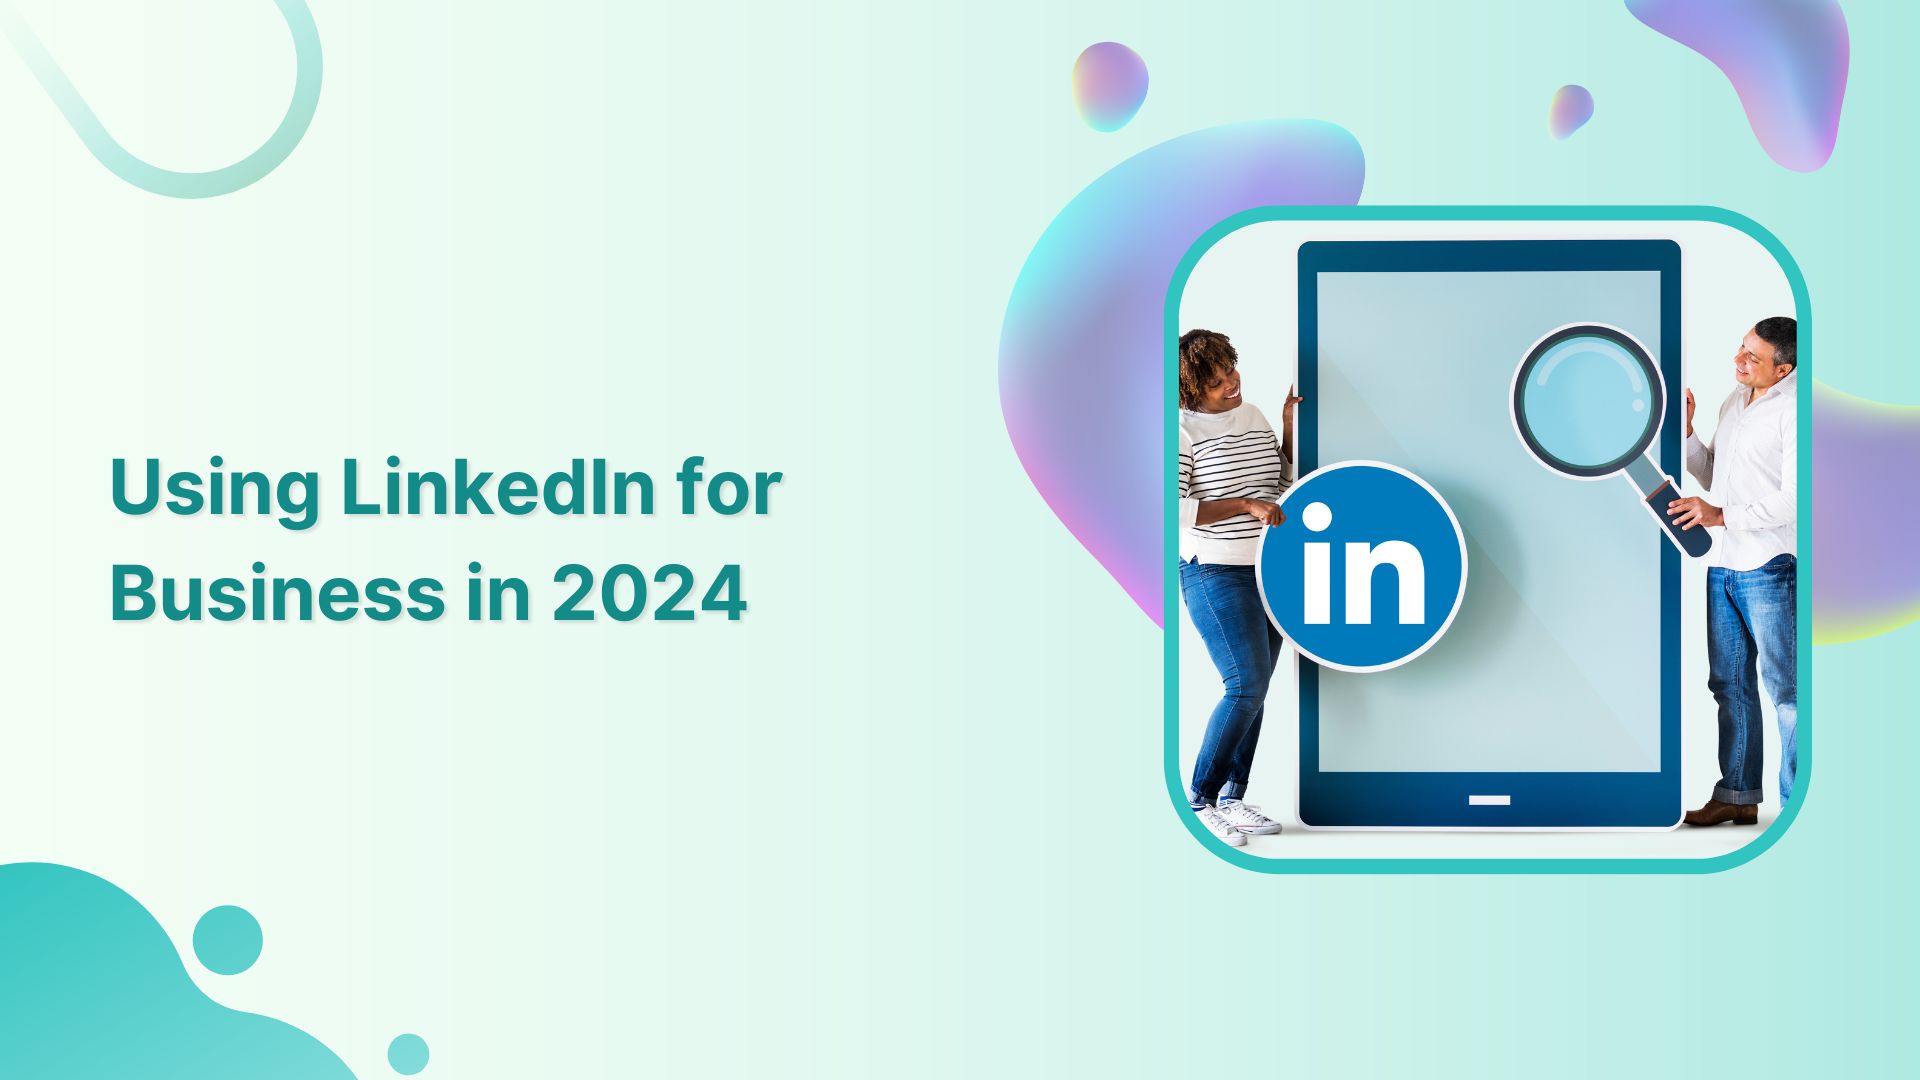 Guide to Using LinkedIn for Business in 2024